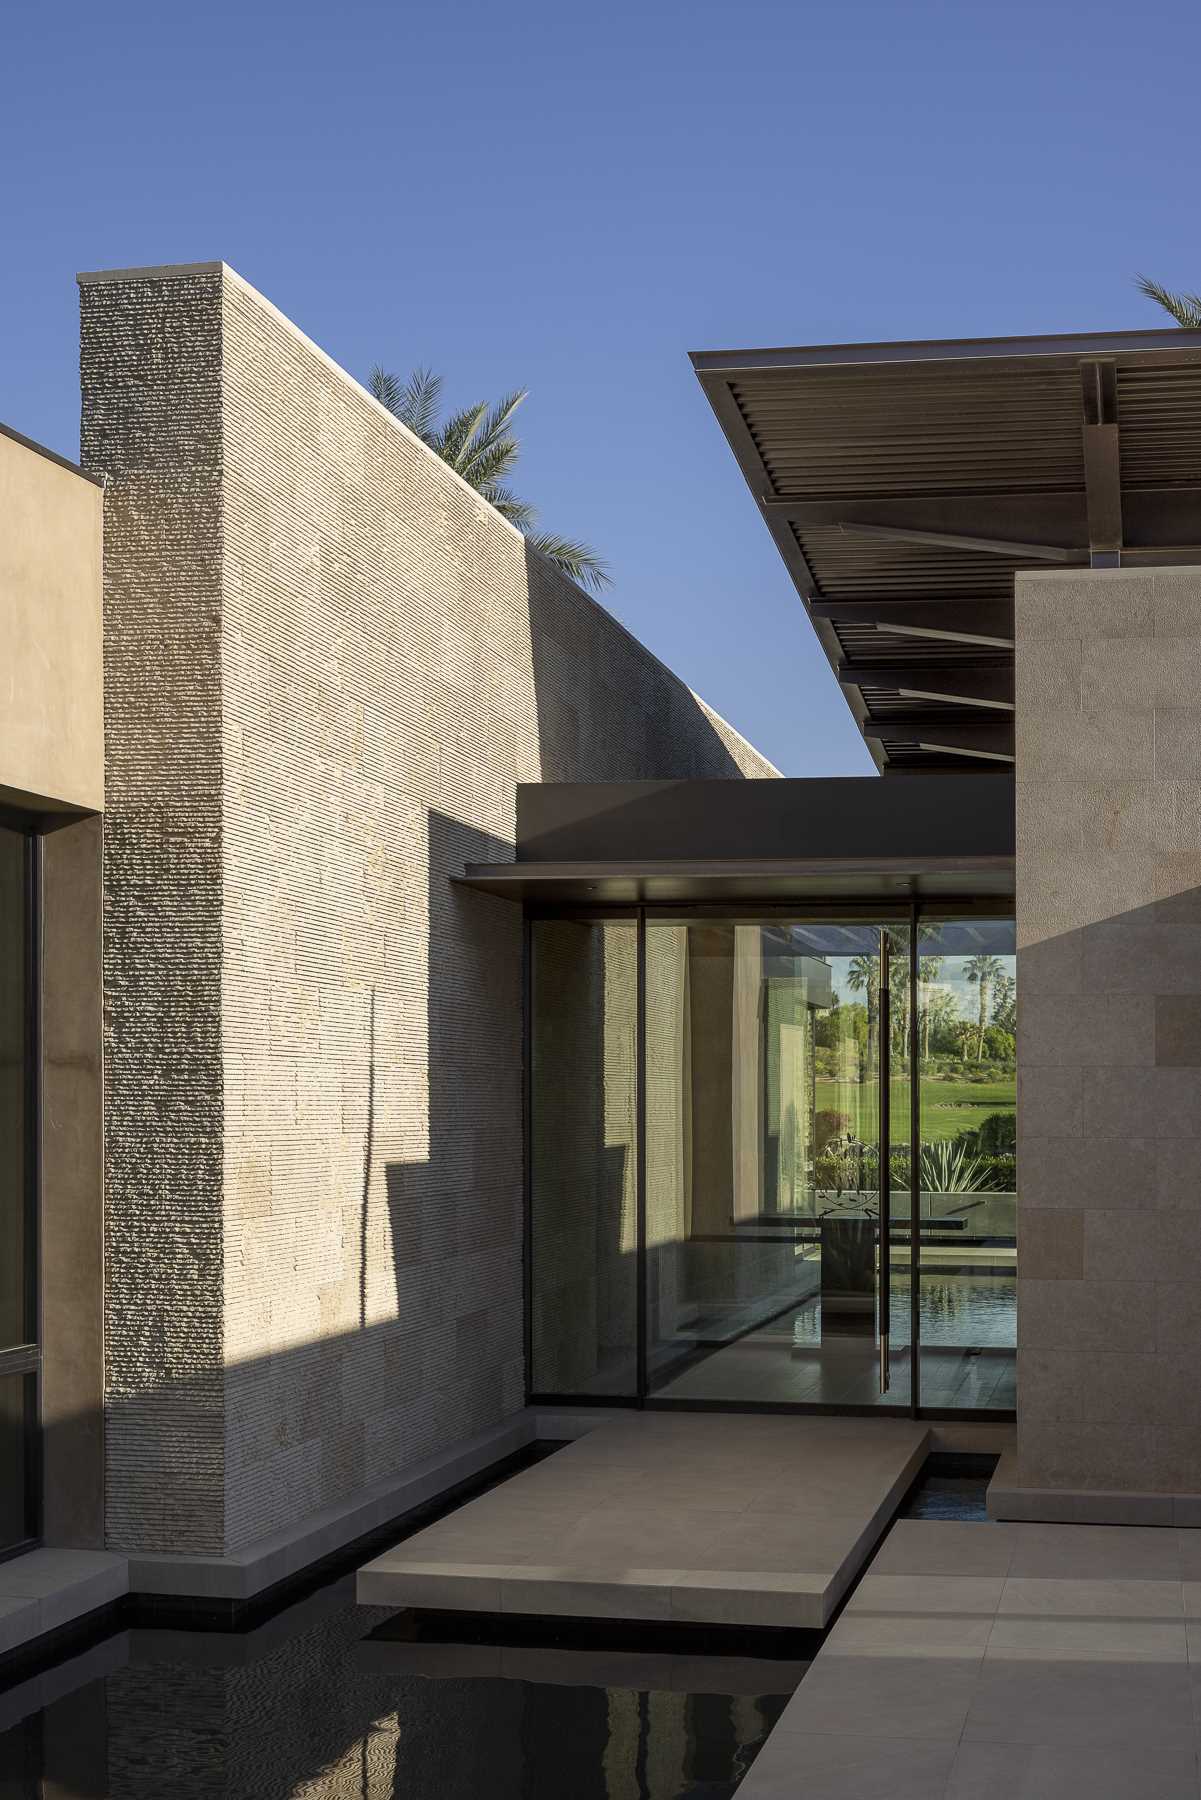 A glass front door provides views of the golf course on the other side of the home, while exterior stone seamlessly extends into the interior, blurring the distinction between indoor and outdoor spaces.